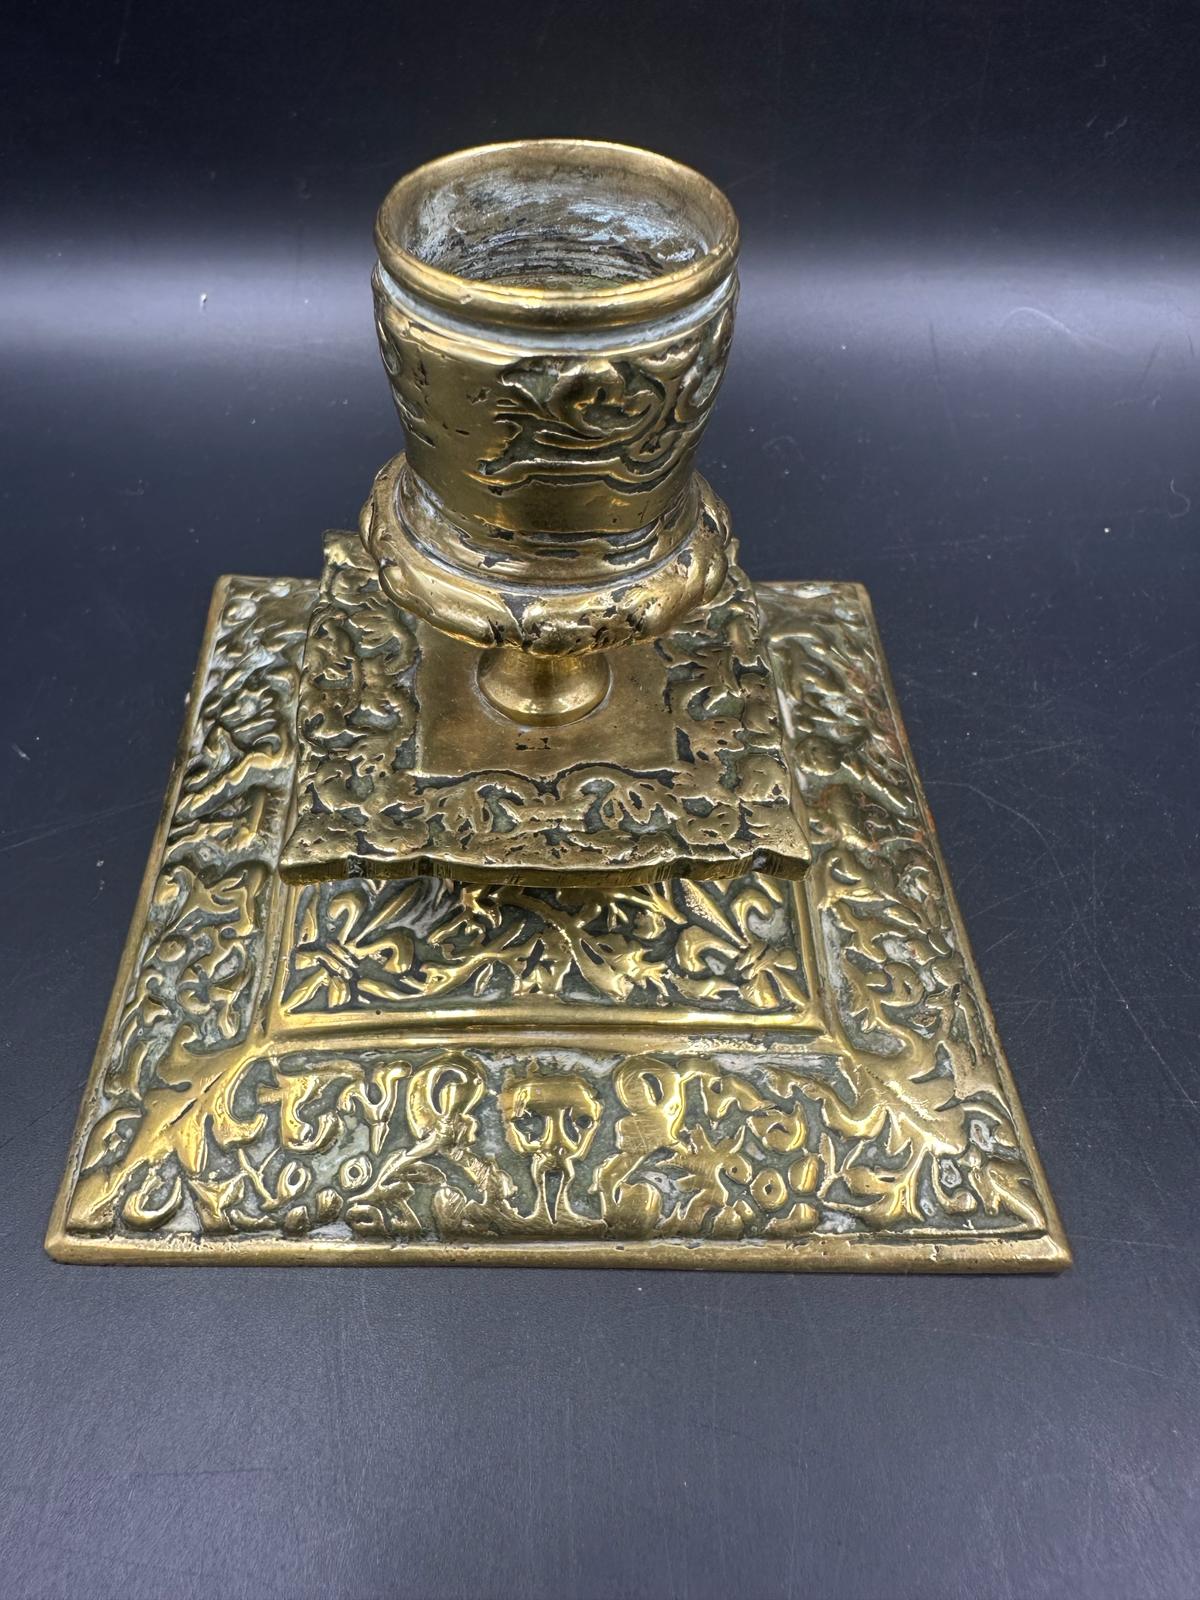 Two pairs of ornate brass candlesticks - Image 4 of 4